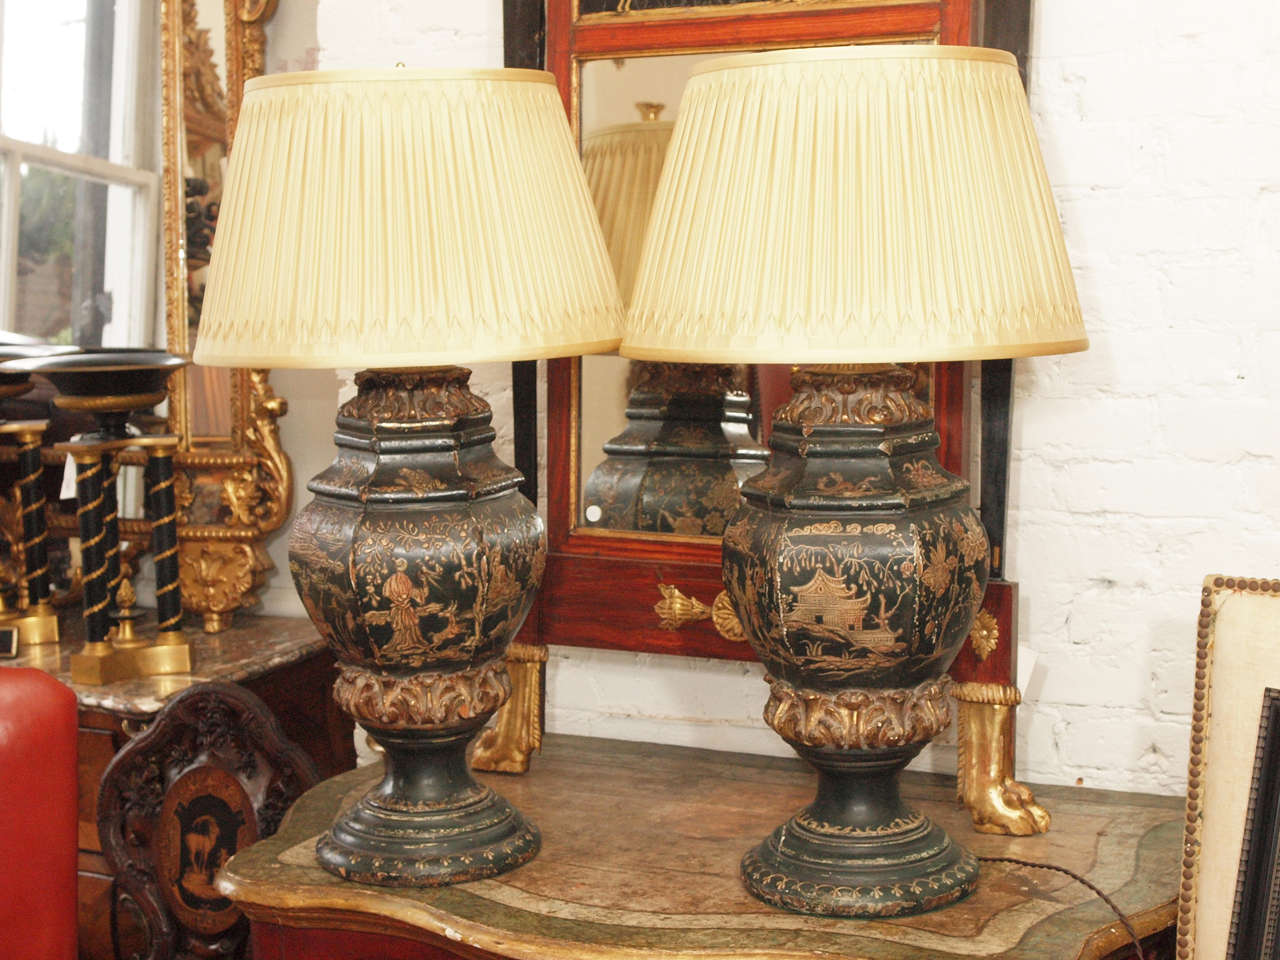 Pair of Chinoiserie Decorated carved wood urns now wired as lamps with smocked silk shades.